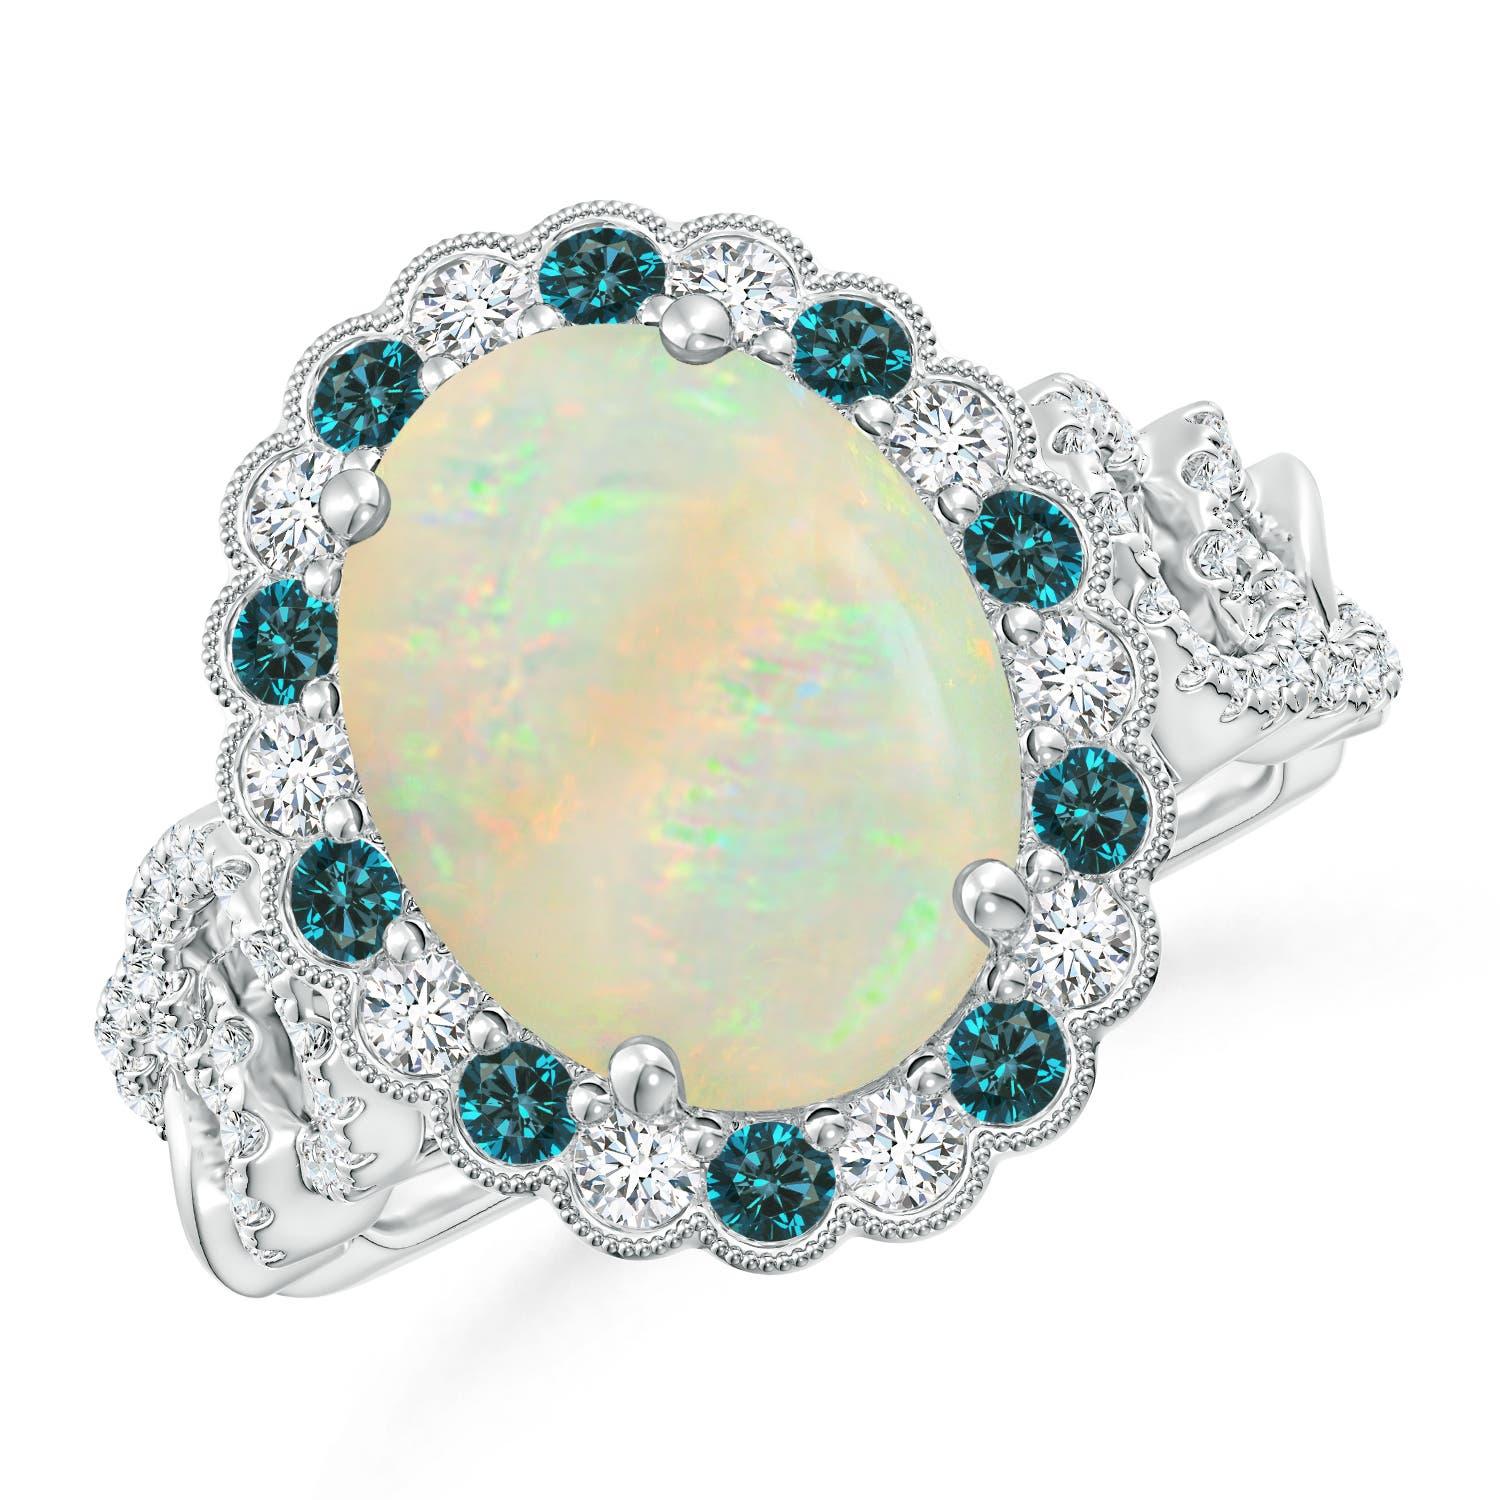 For Sale:  GIA Certified Natural Opal Ring in White Gold with Blue & White Diamonds